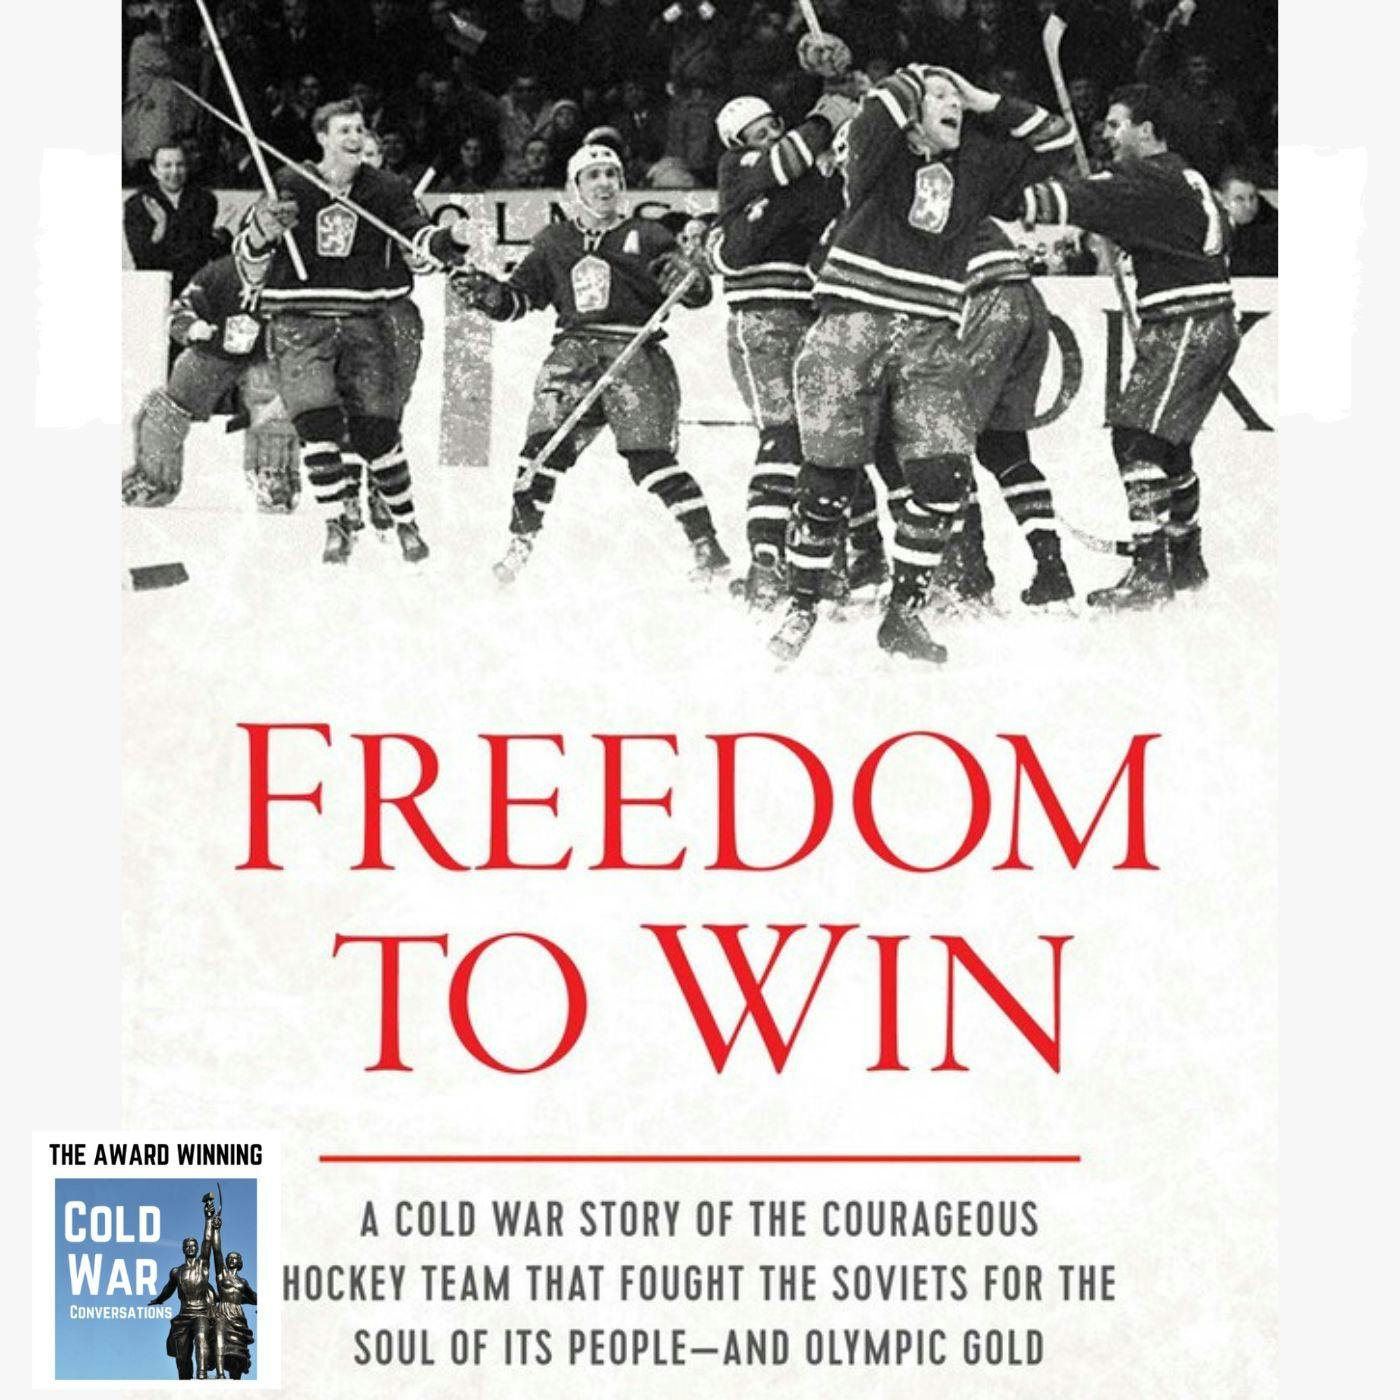 The Cold war ice hockey team that fought the Soviets for the soul of its nation (298)